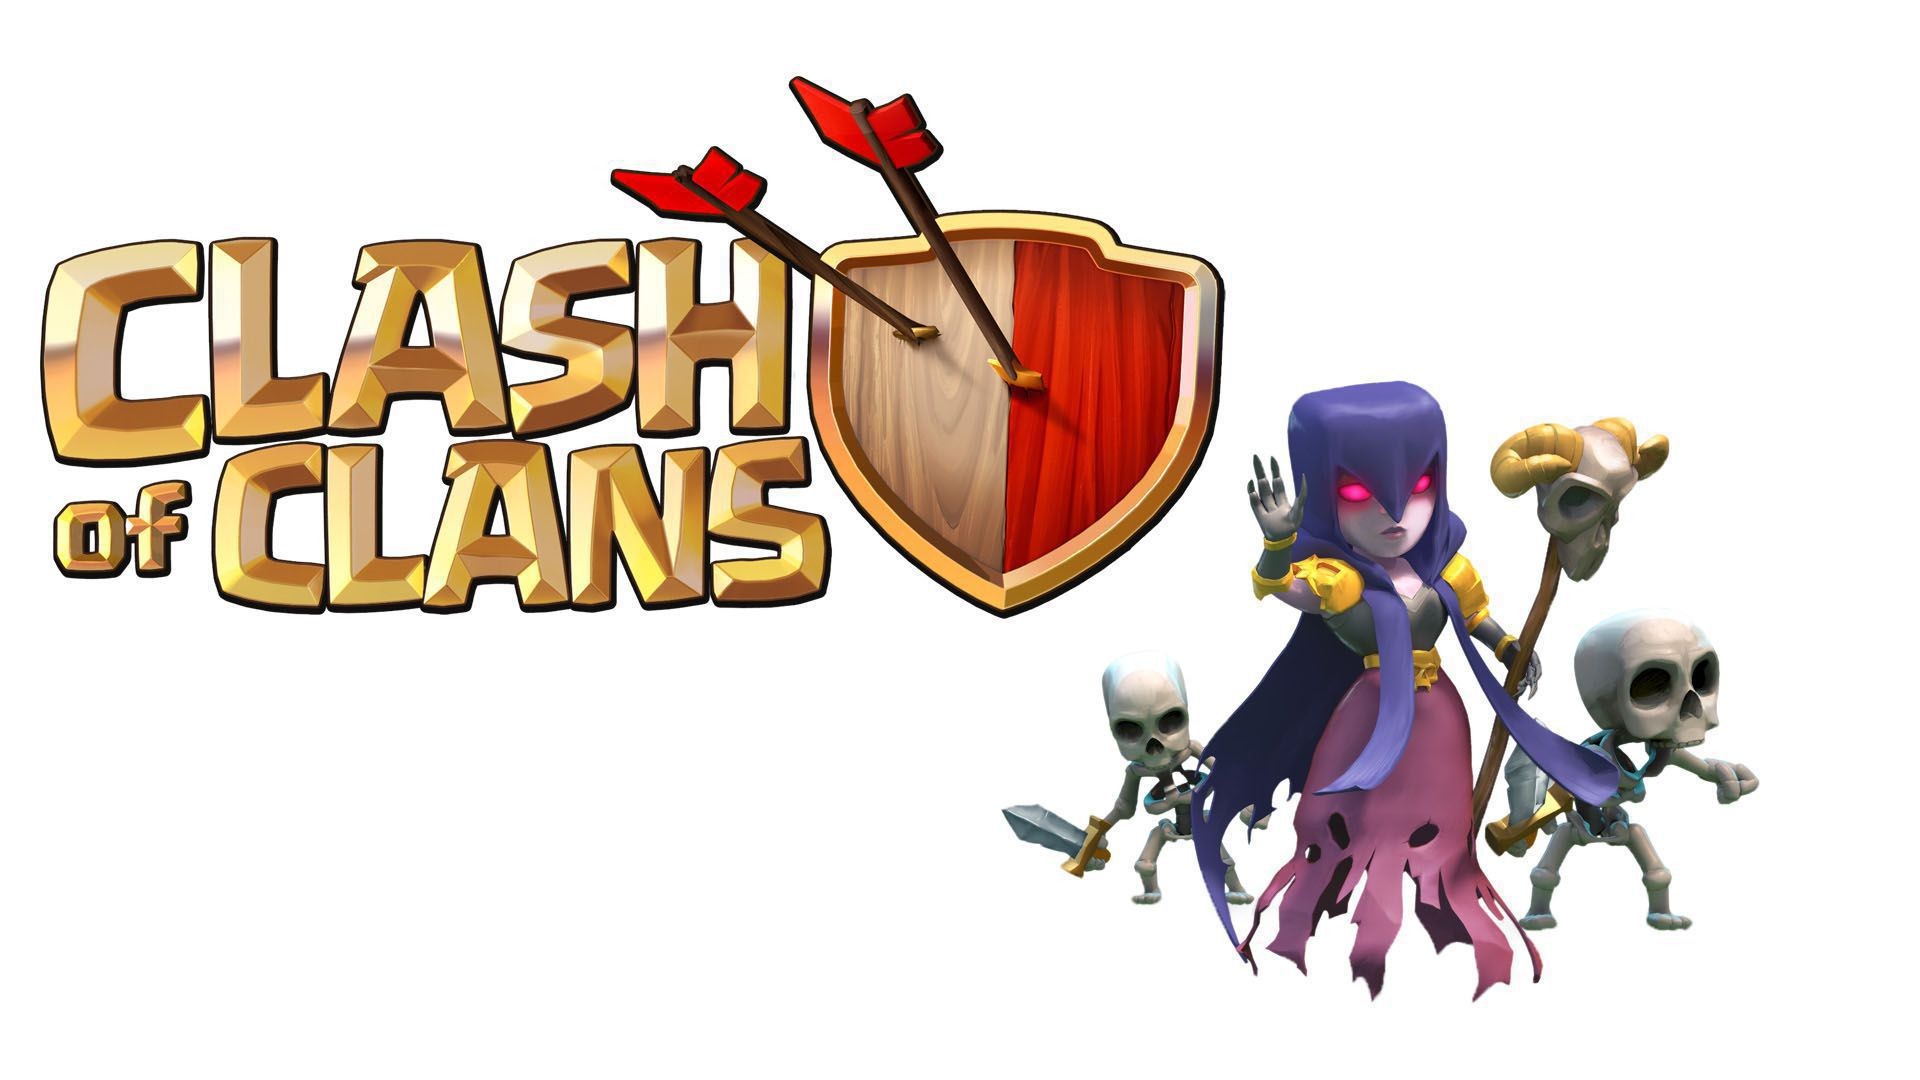 1920x1080 Clash Of Clans Background Clash Of Clans Computer Wallpaper ...